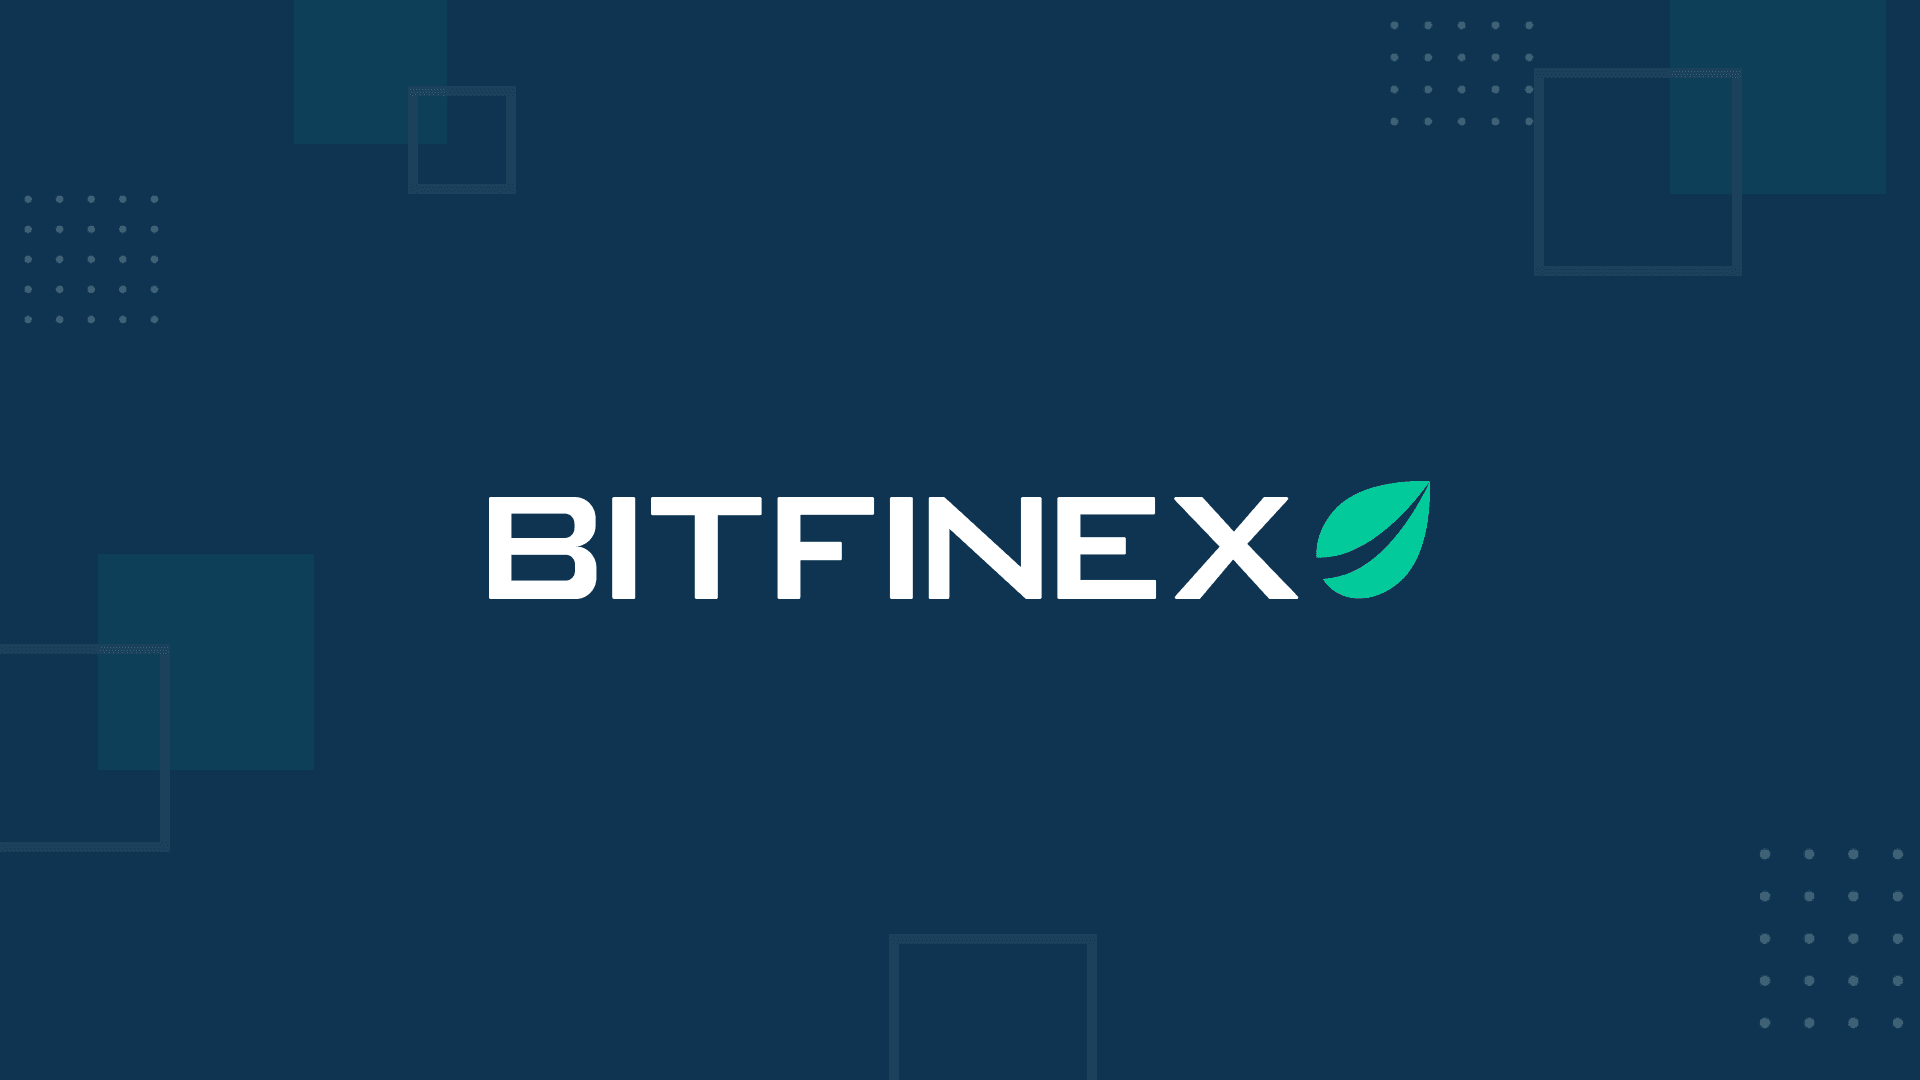 Statement from Bitfinex about OCCRP report published in Wired